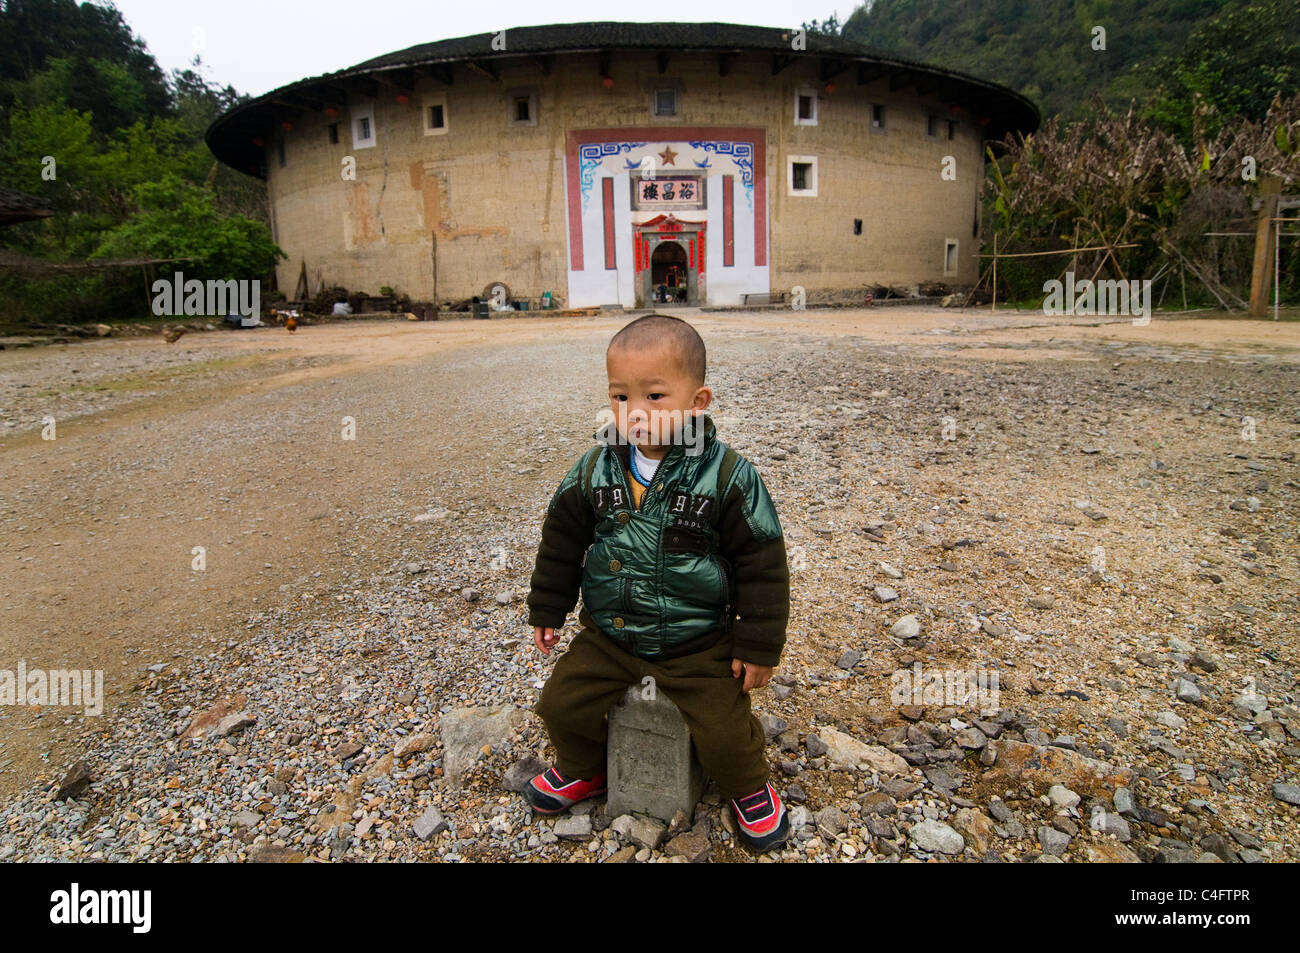 A Hakka boy standing in front of a big Tulou  building in Fujian. Stock Photo